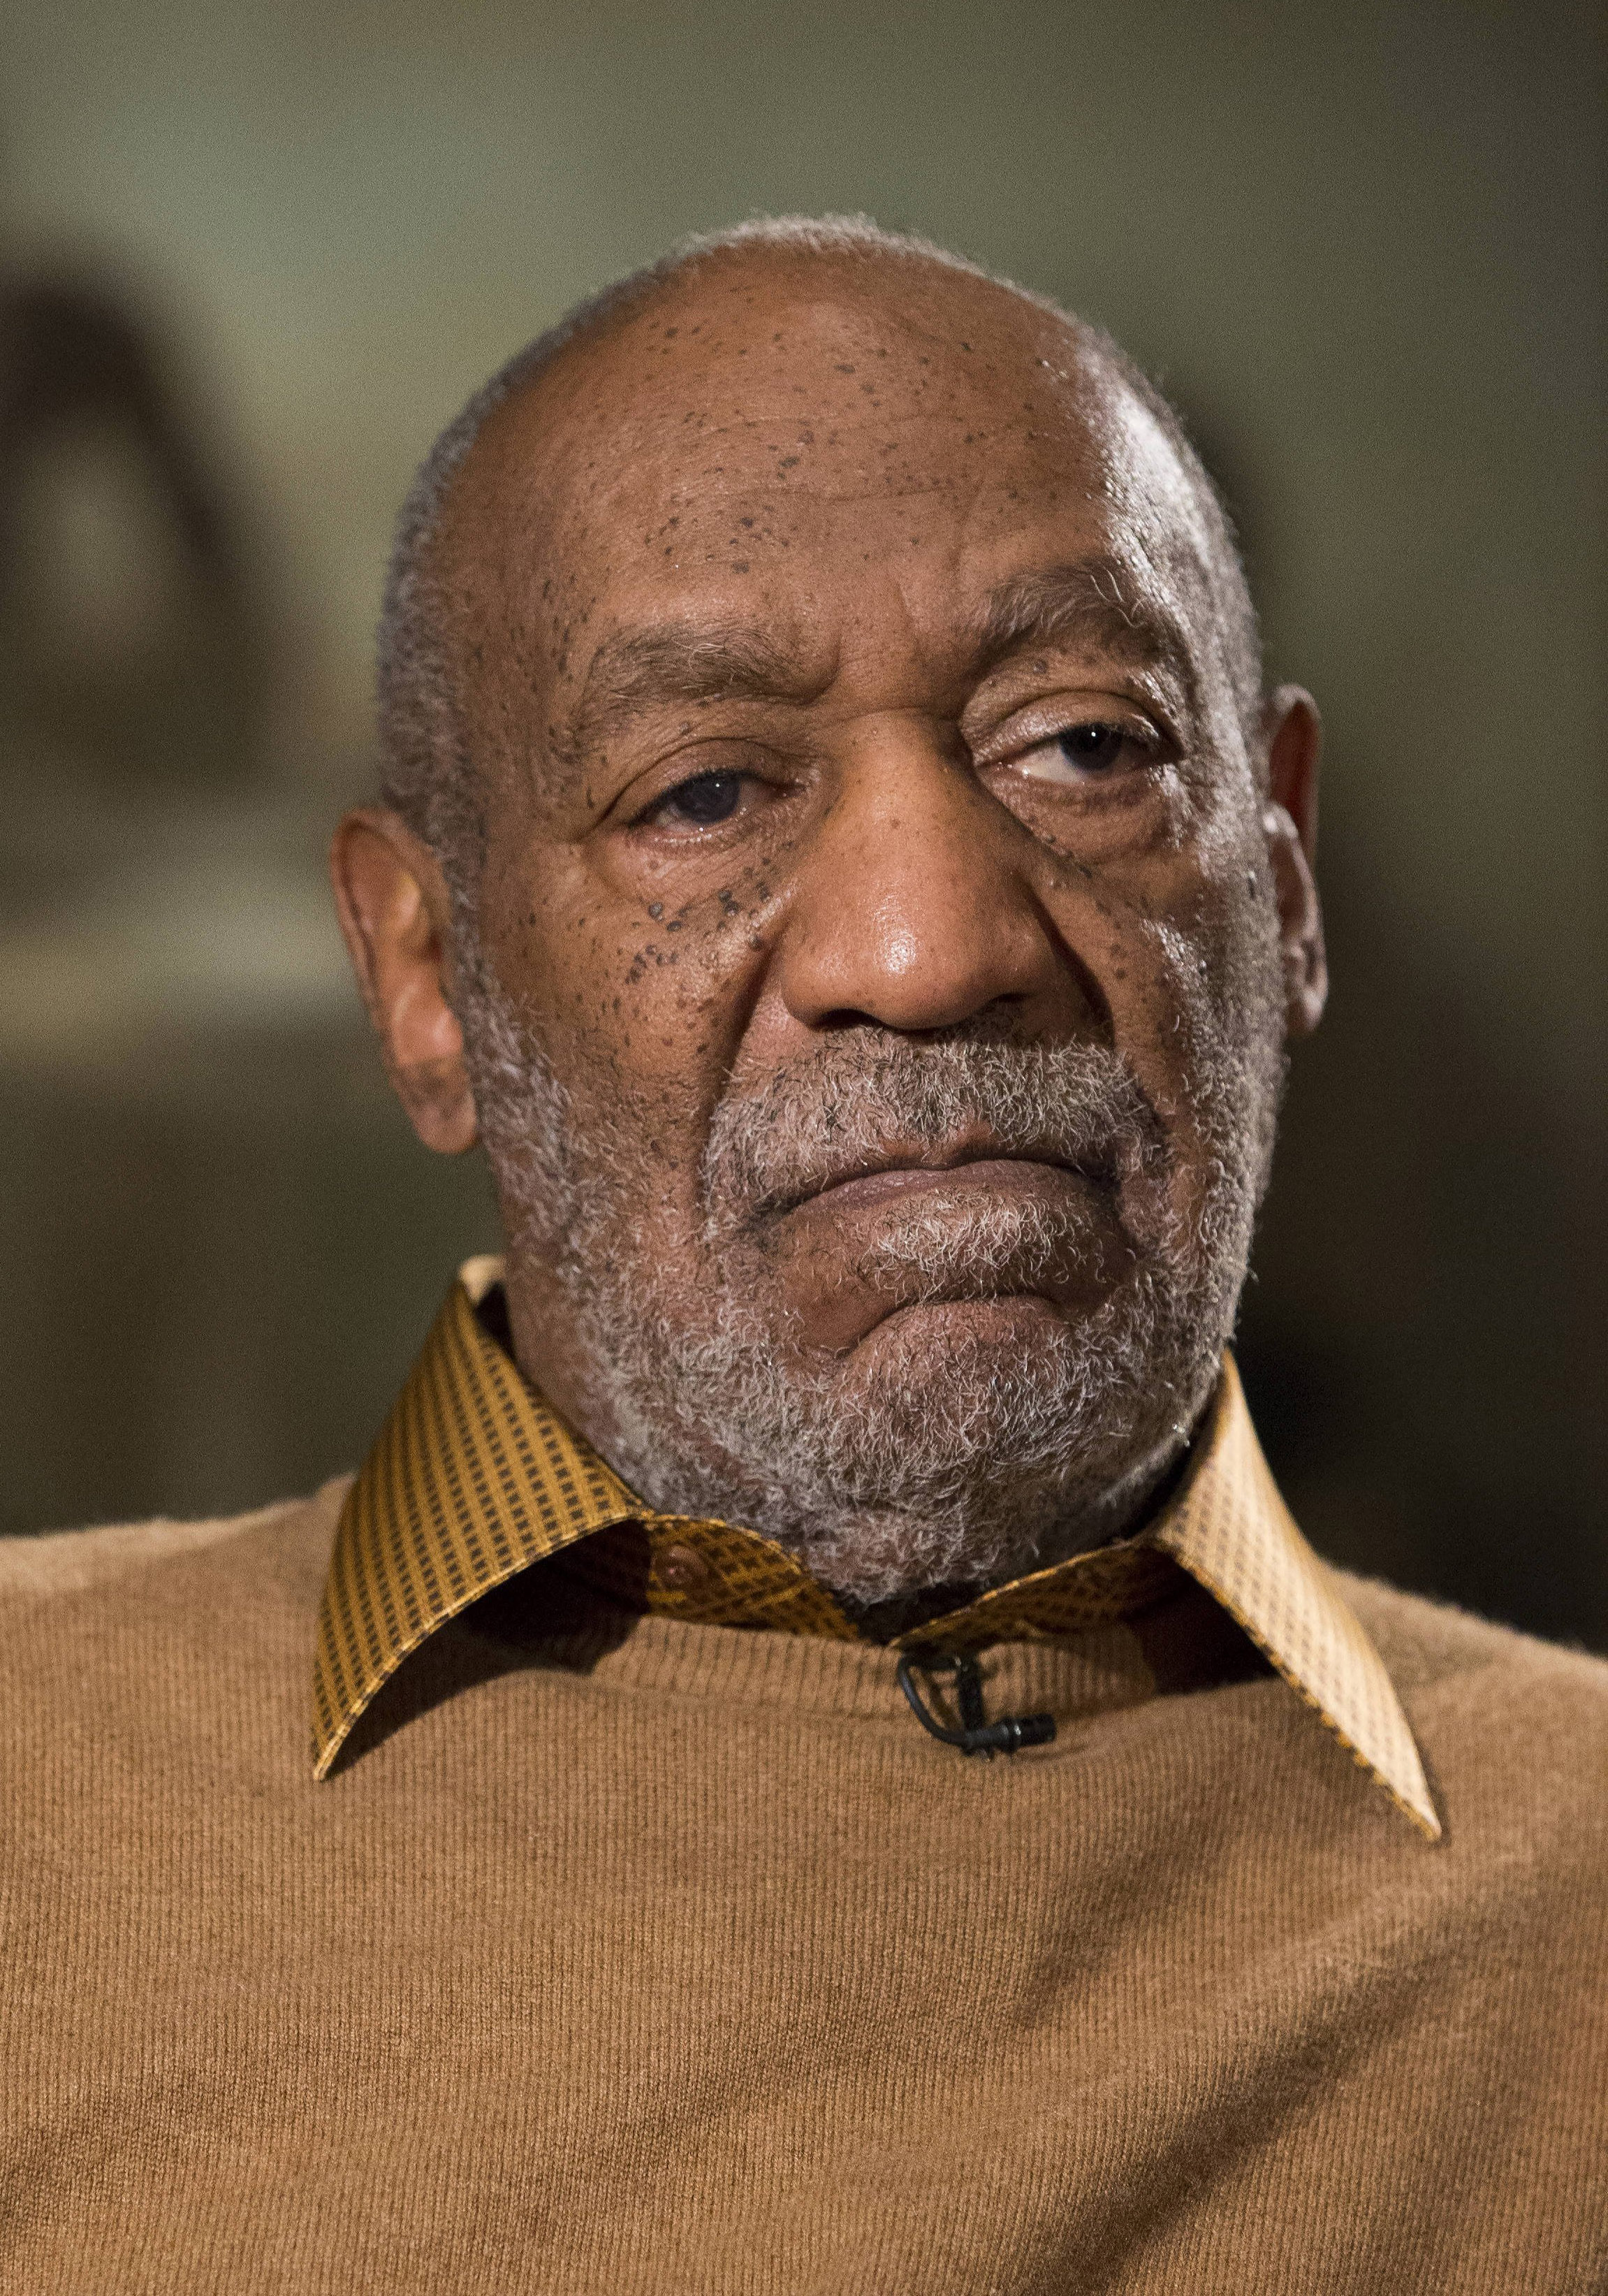 Bill Cosby during an interview about the upcoming exhibit "Conversations: African and African-American Artworks in Dialogue," at the Smithsonian's National Museum of African Art in Washington D.C. on Nov. 6, 2014 (Evan Vucci—AP)